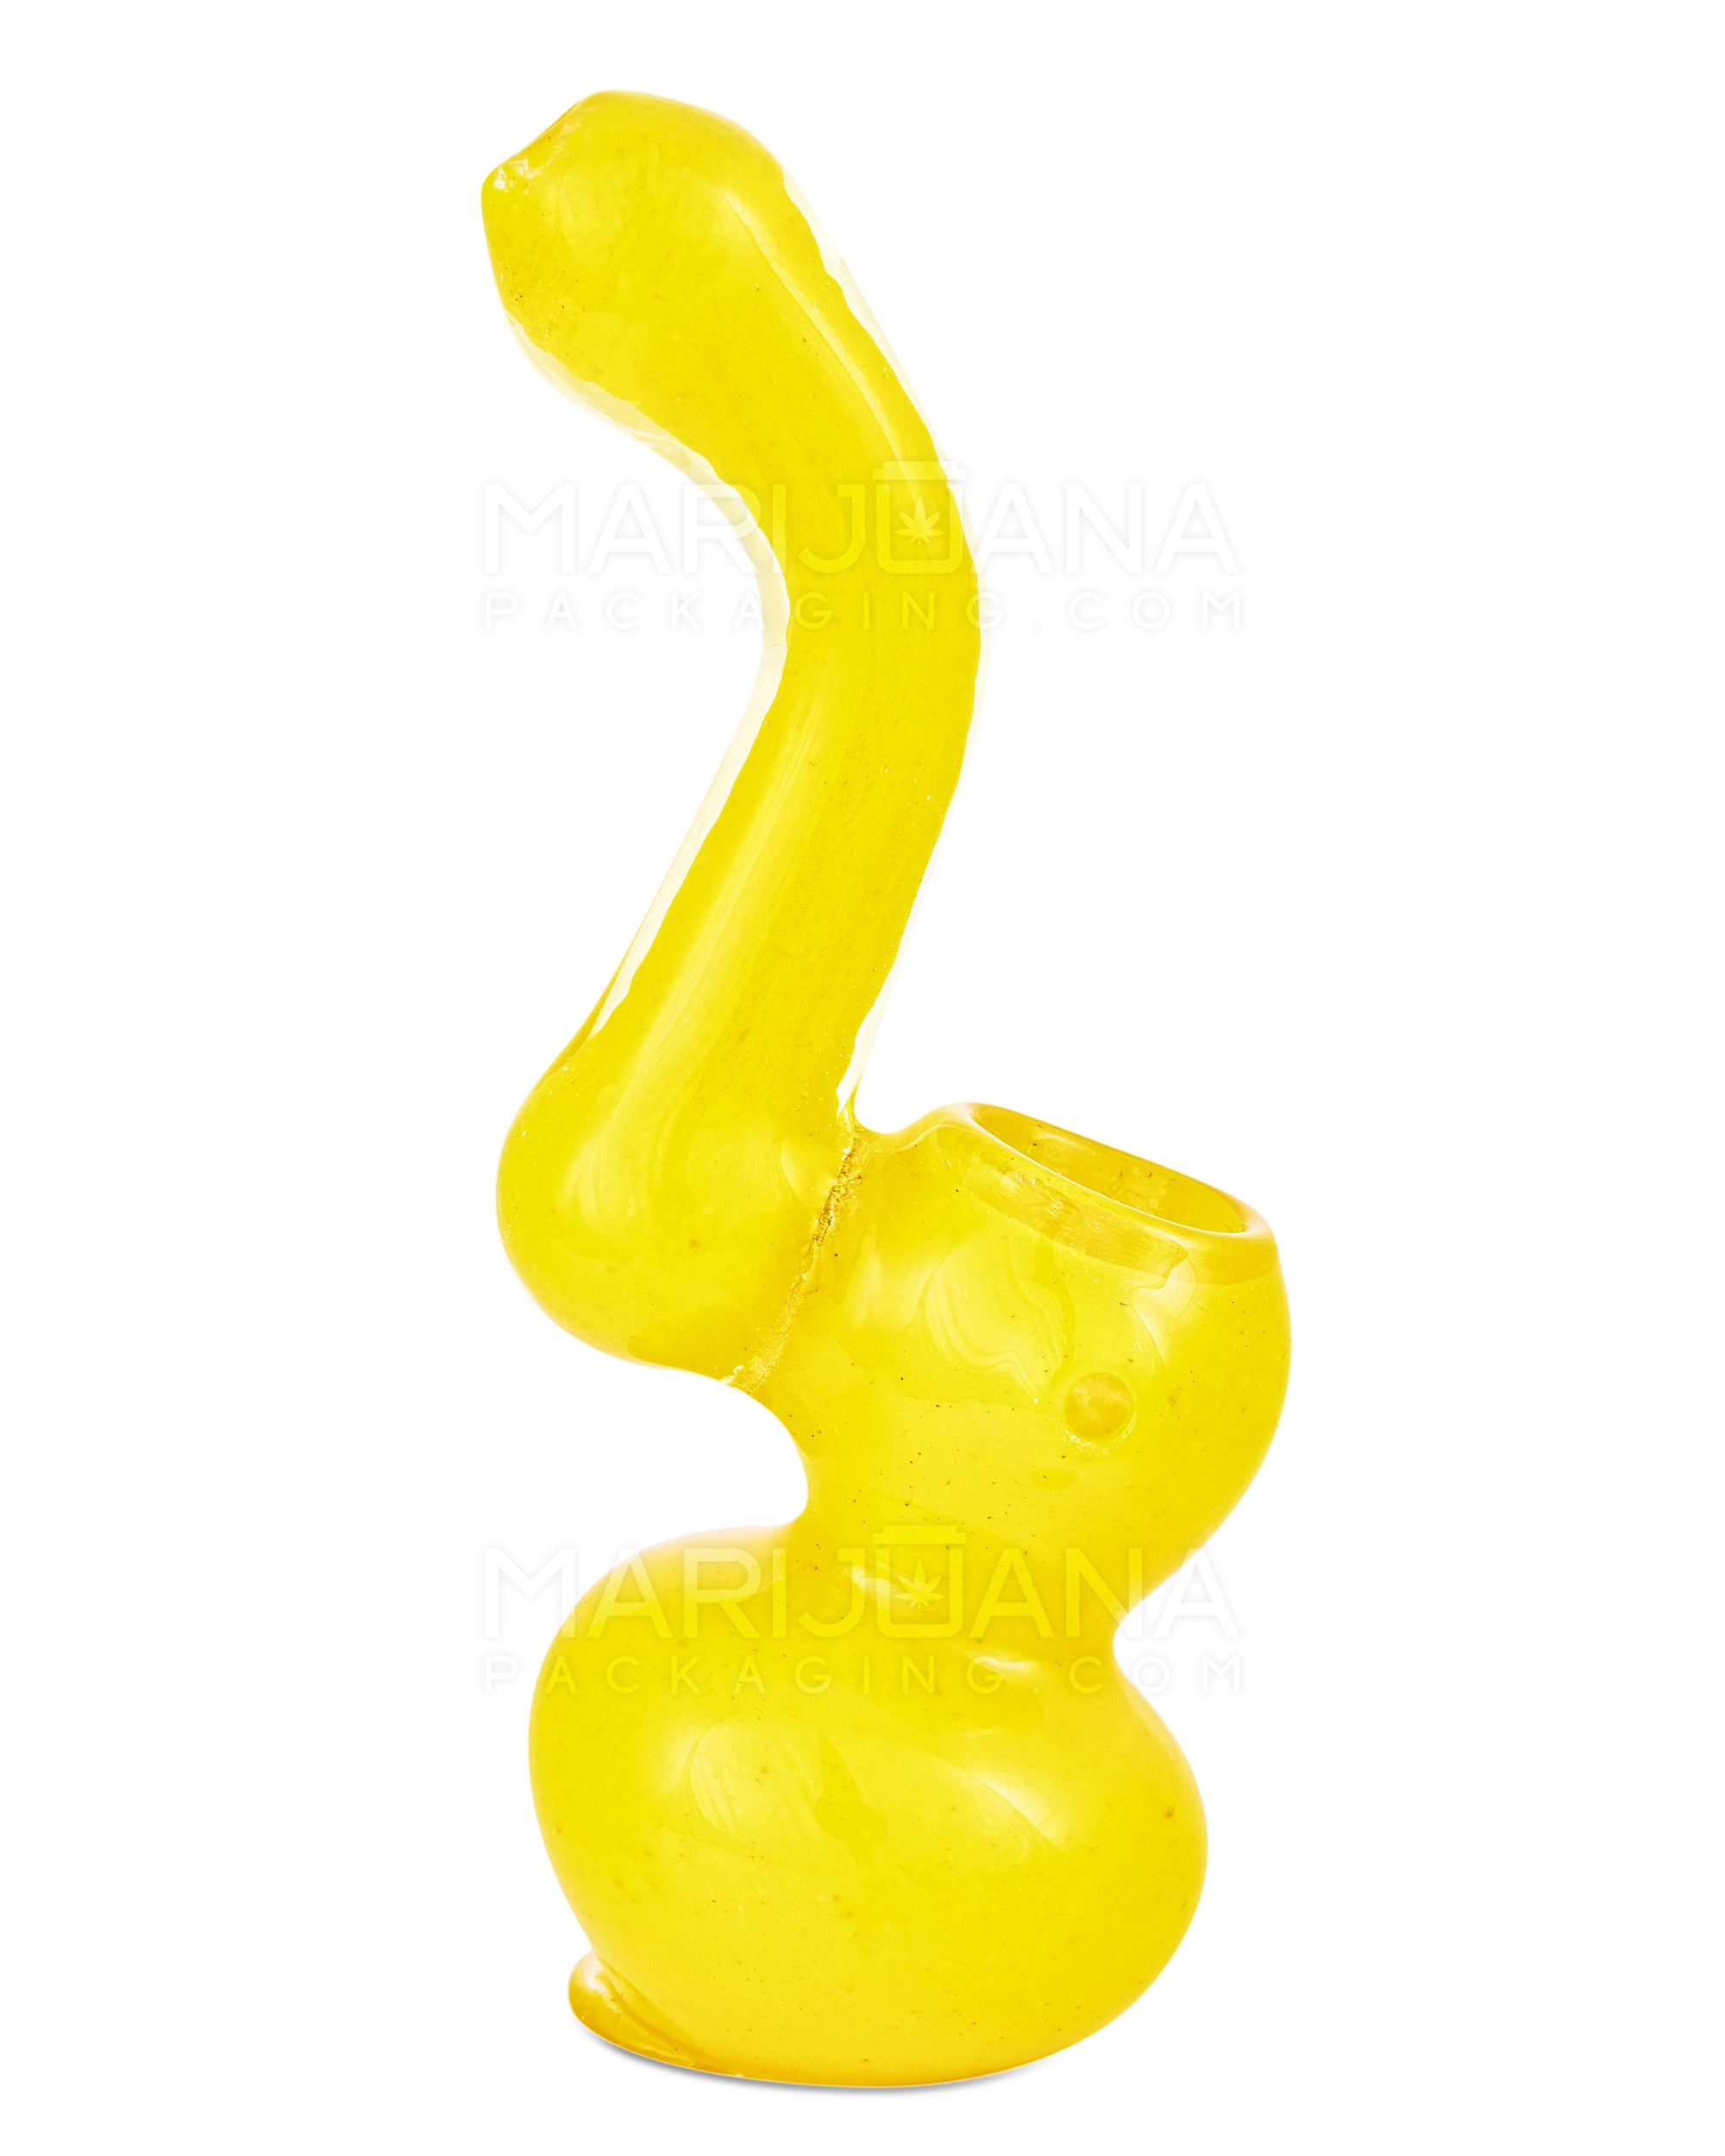 Solid Fritted Glass Bubbler | 3.5in Tall - Glass - Assorted - 7